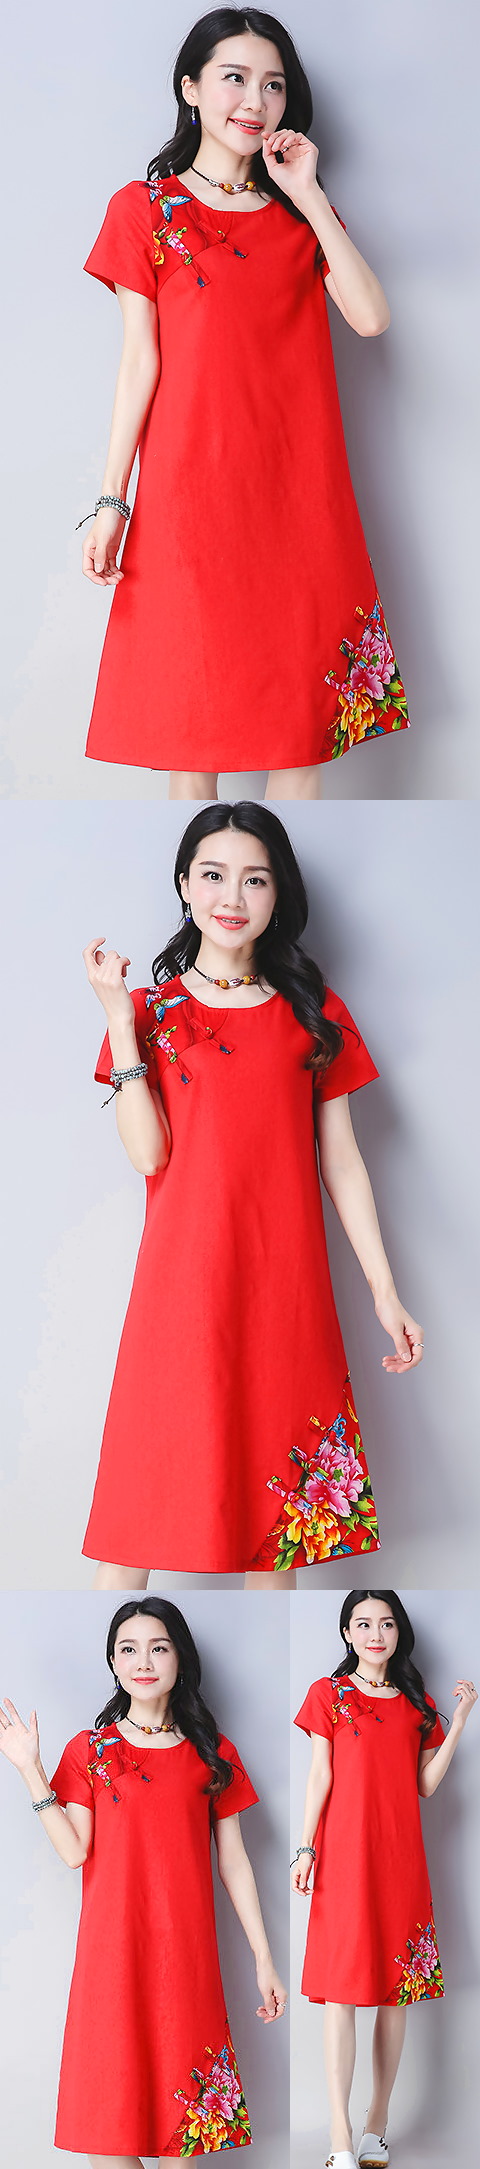 Ethnic Short-length Dress with patches-Red (RM)